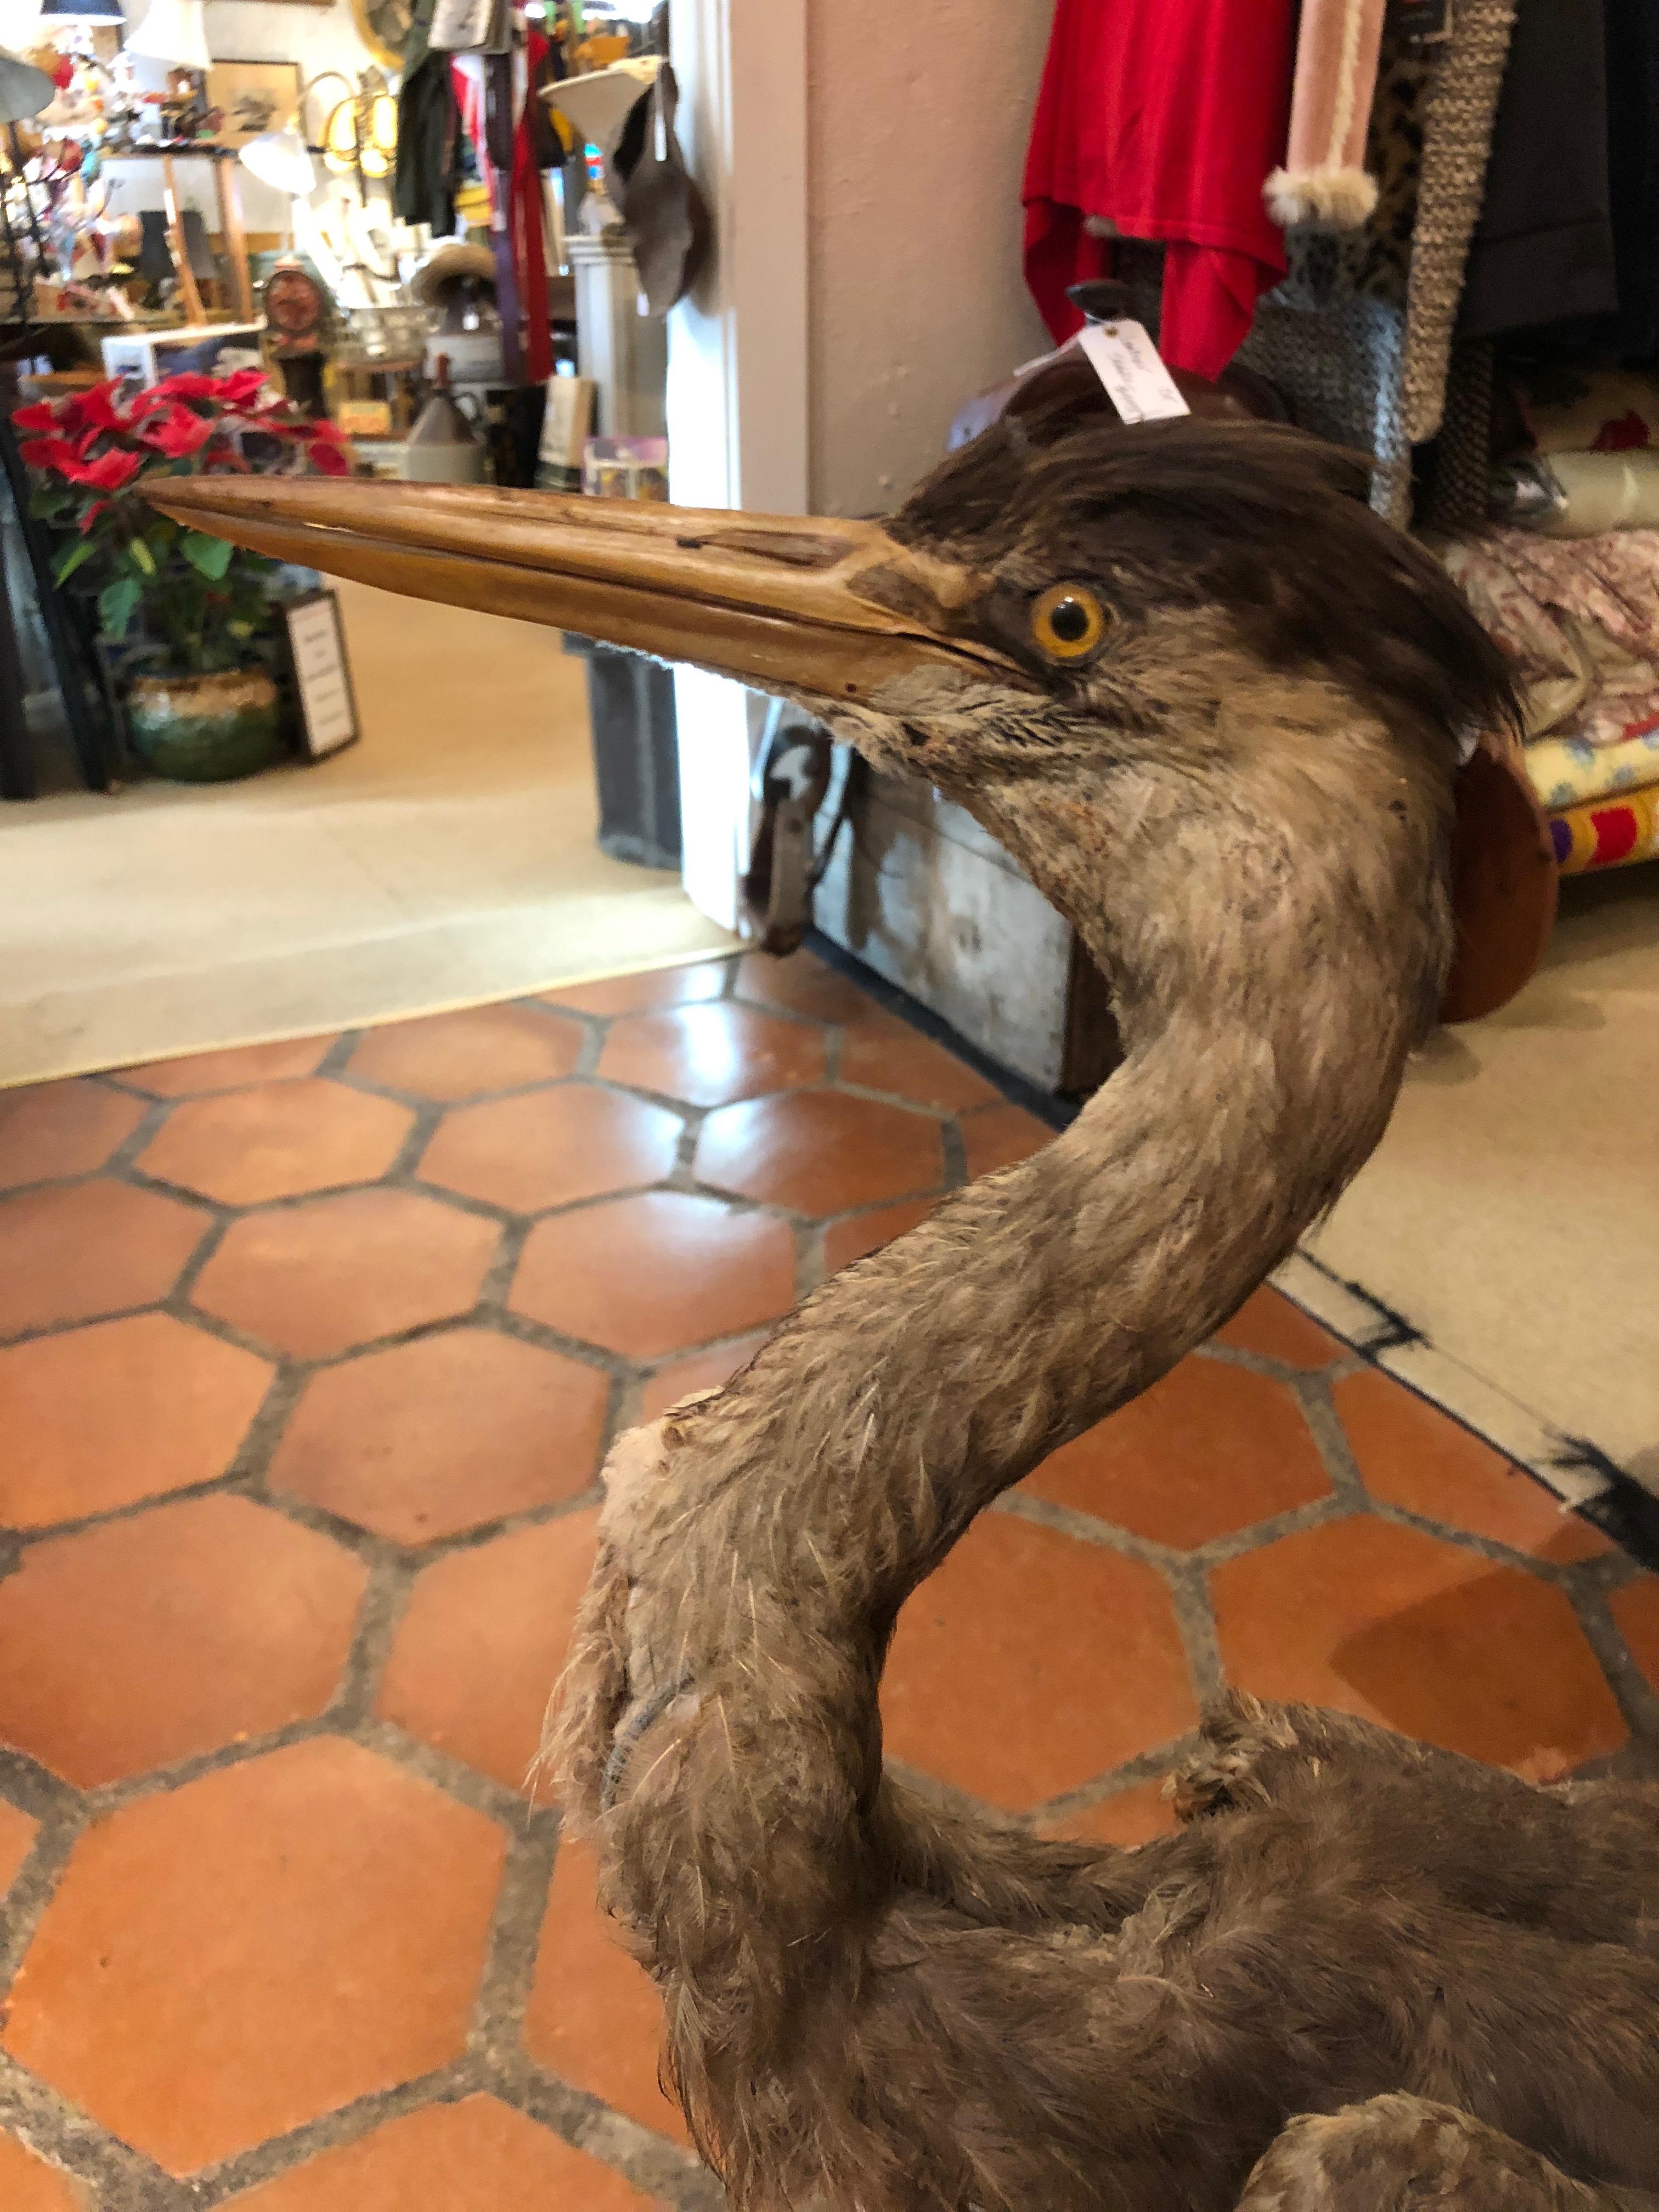 For the taxidermy collector, an extremely lifelike stuffed heron in all her feathery beauty.